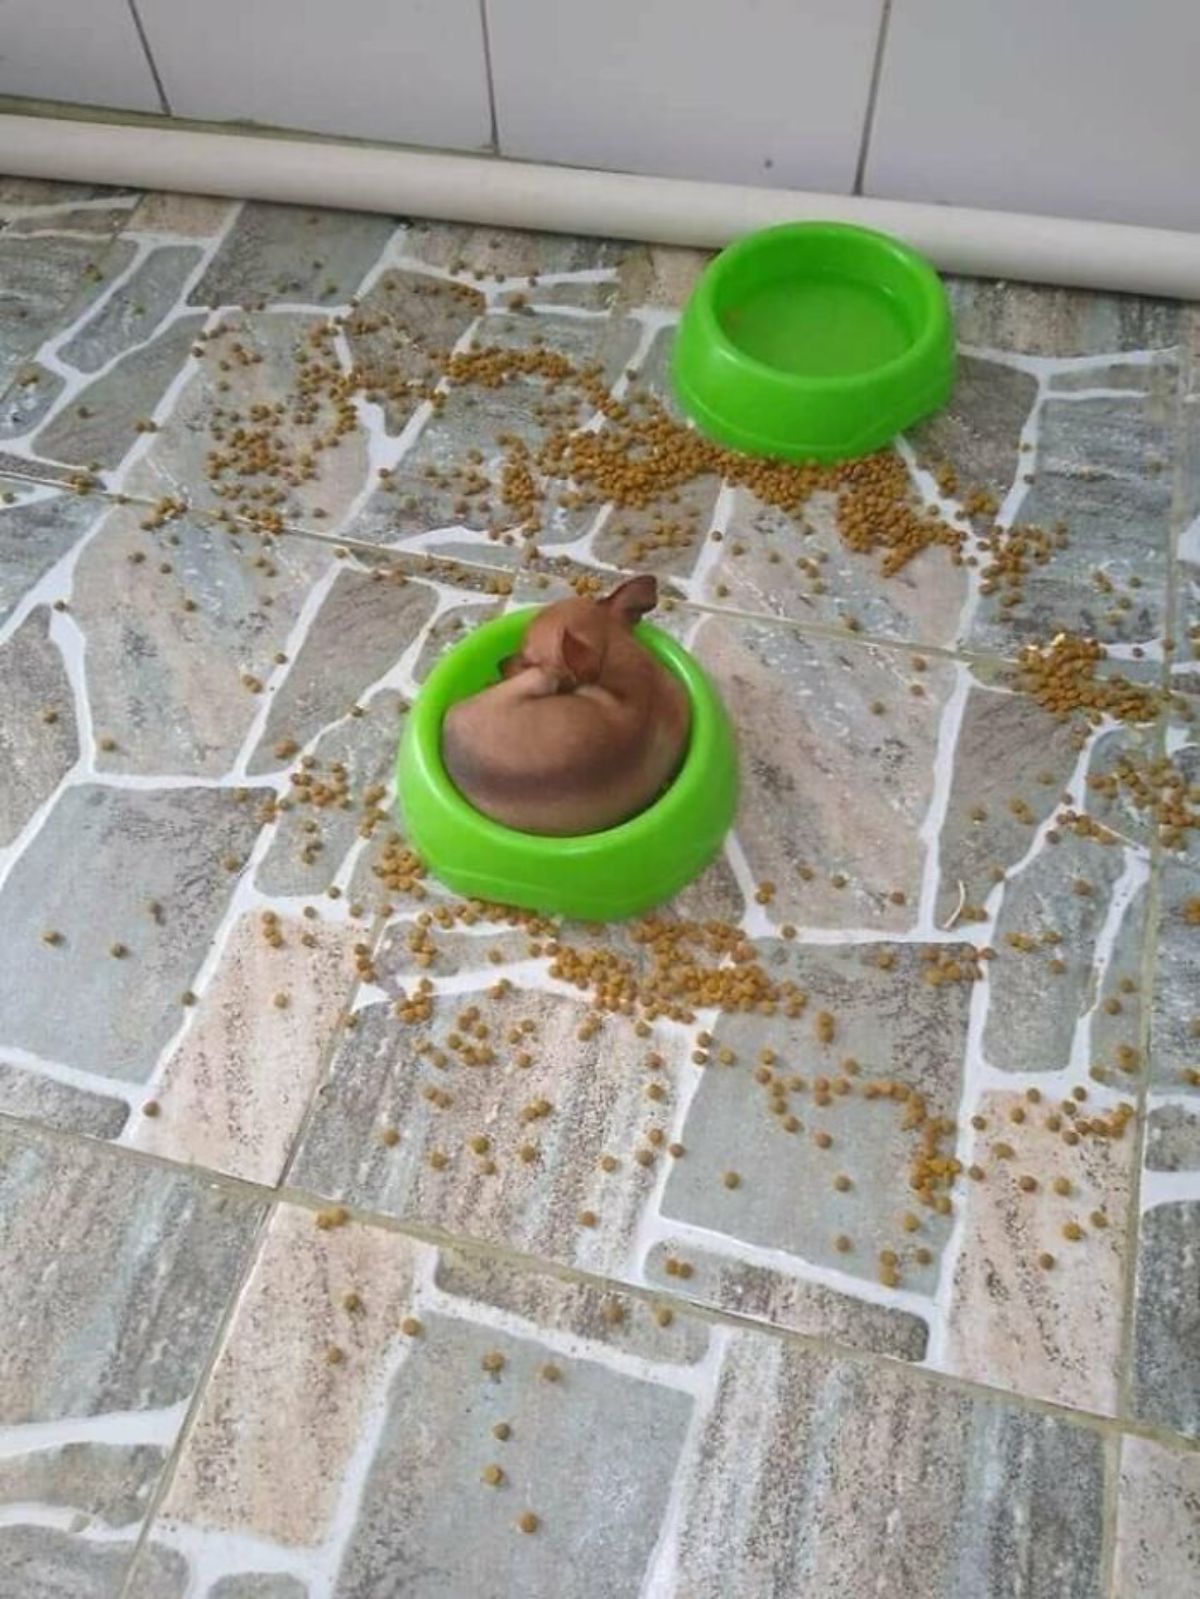 small brown dog sleeping inside a green bowl next to another green bowl and lots of dry food kibble on the floor